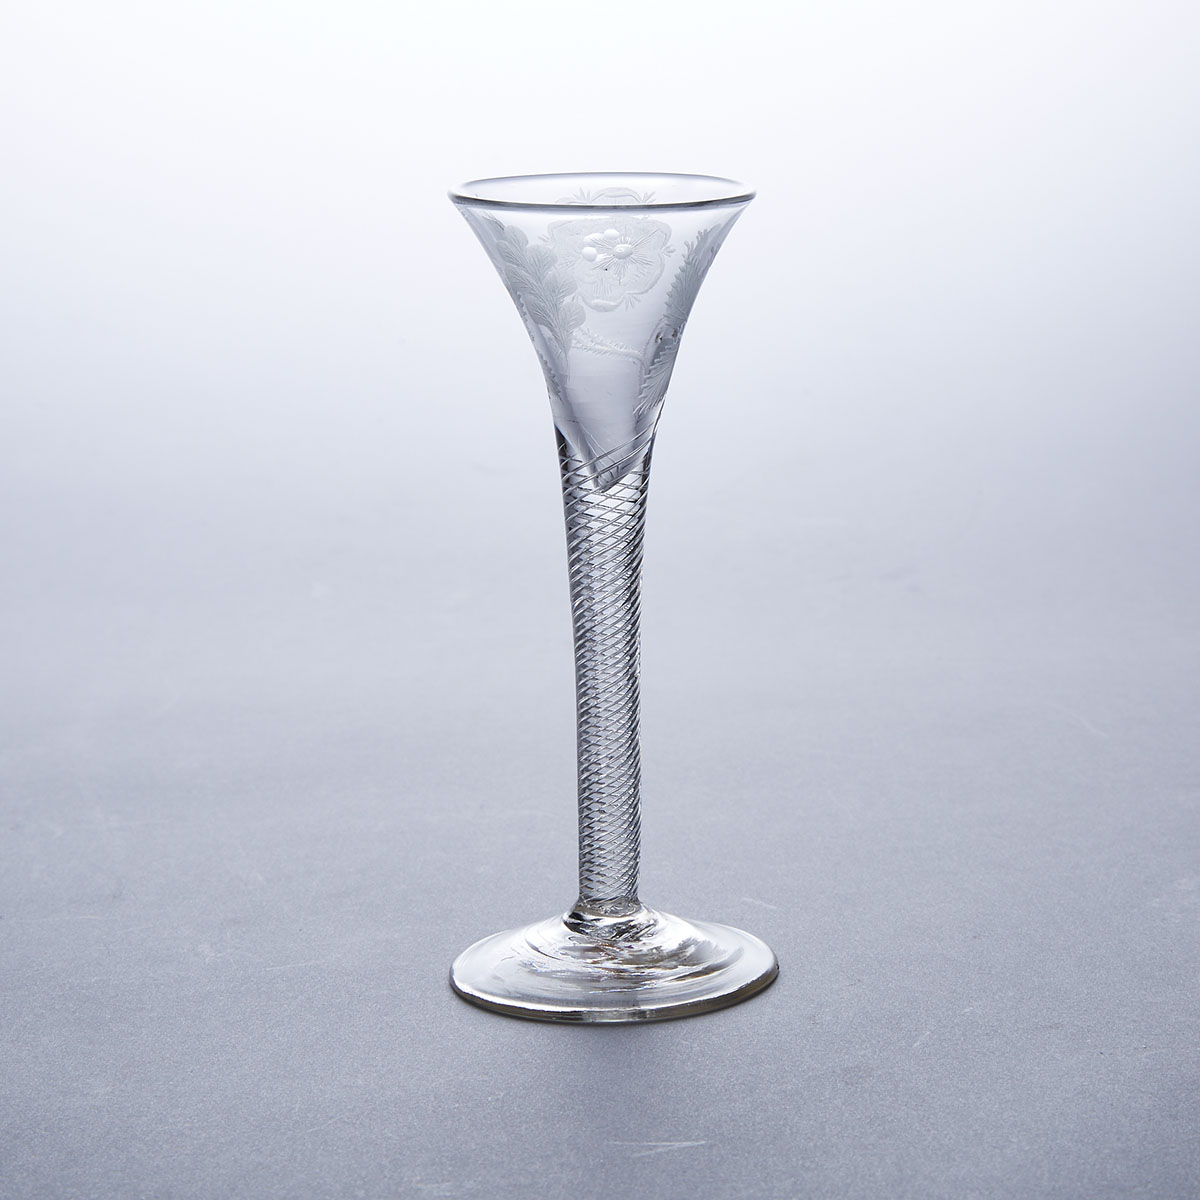 Jacobite Engraved Airtwist Stemmed Small Wine Glass, c.1750